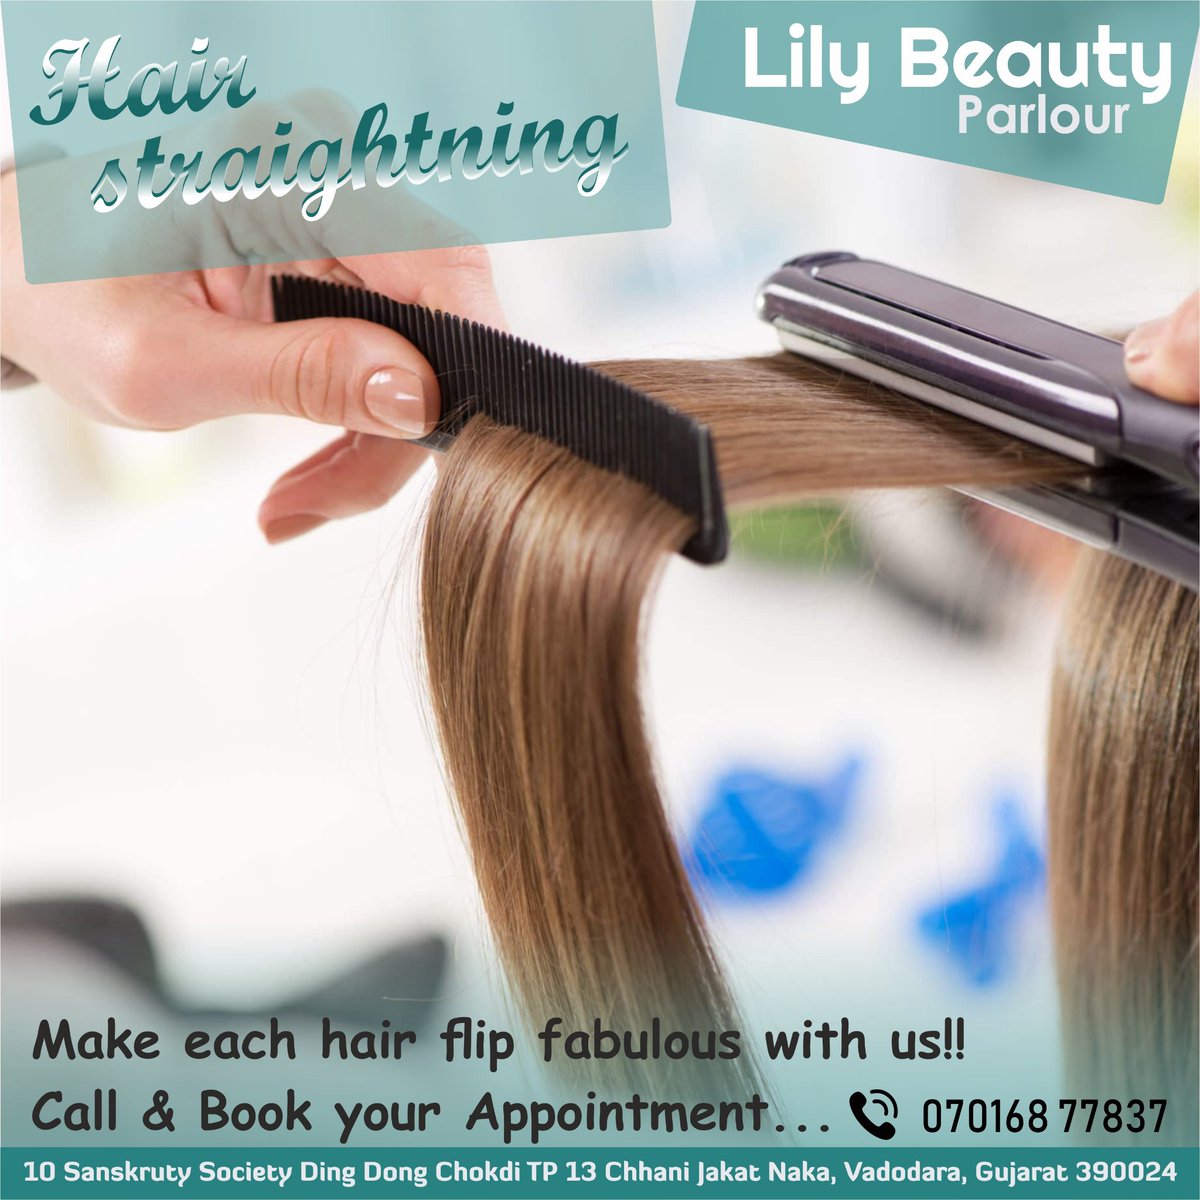 Lily Beauty Parlour on Twitter: 